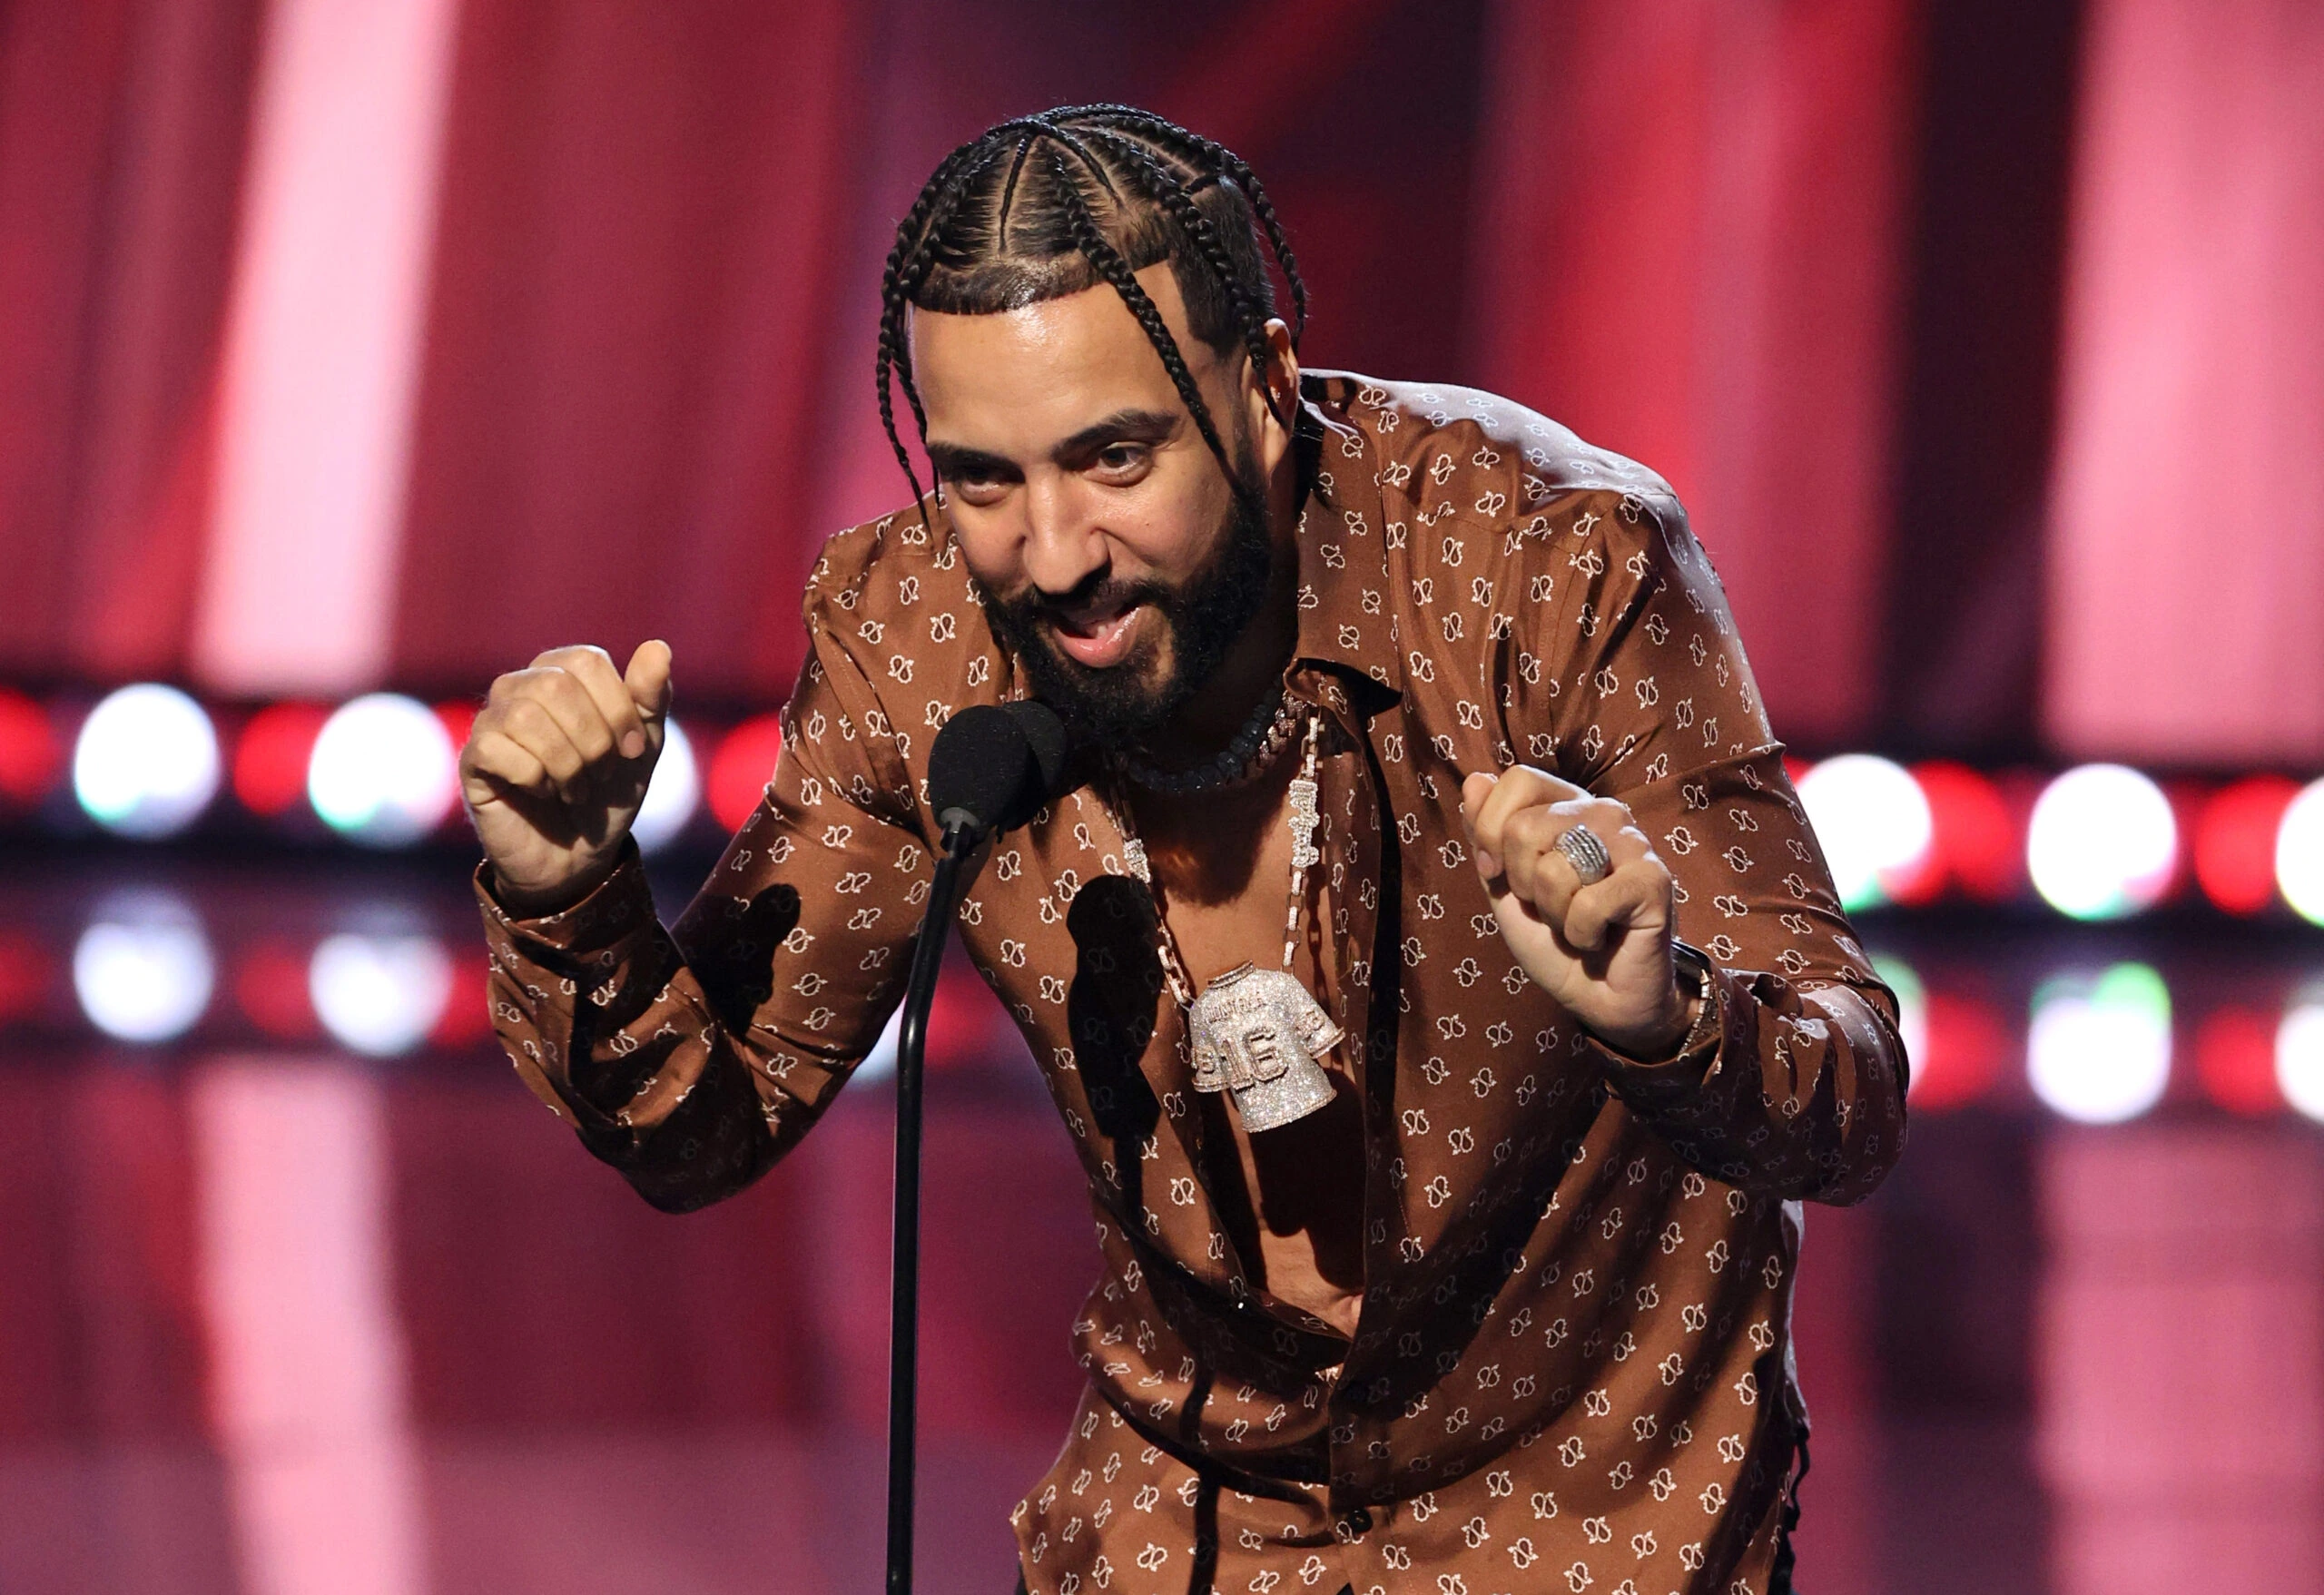 LOS ANGELES, CALIFORNIA – MAY 27: (EDITORIAL USE ONLY) French Montana speaks onstage at the 2021 iHeartRadio Music Awards at The Dolby Theatre in Los Angeles, California, which was broadcast live on FOX on May 27, 2021. (Photo by Kevin Winter/Getty Images for iHeartMedia)